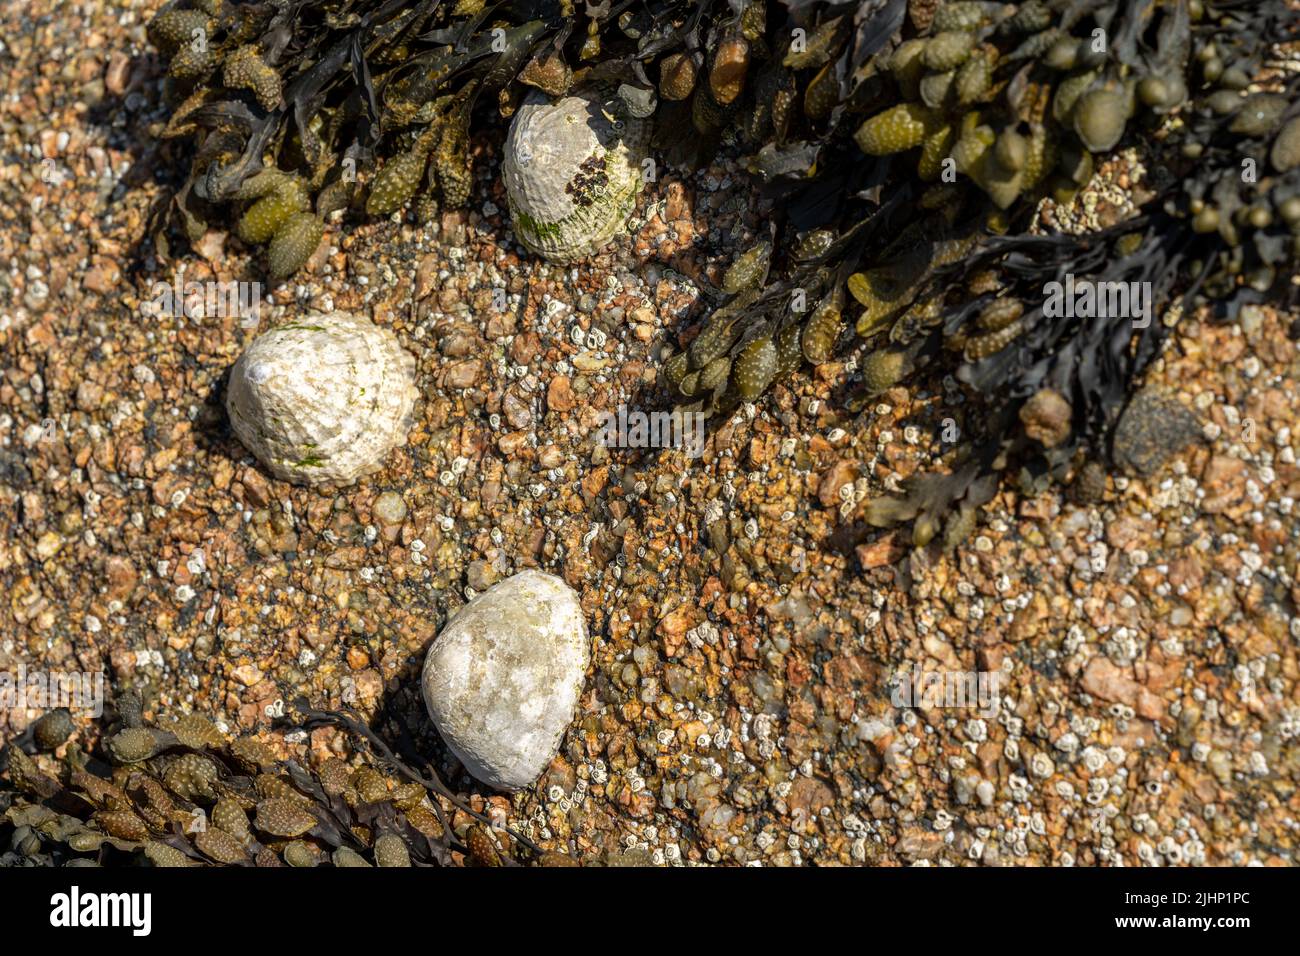 Limpets. Aquatic sea snails stuck to a rock on the UK coastline at low tide. Stock Photo